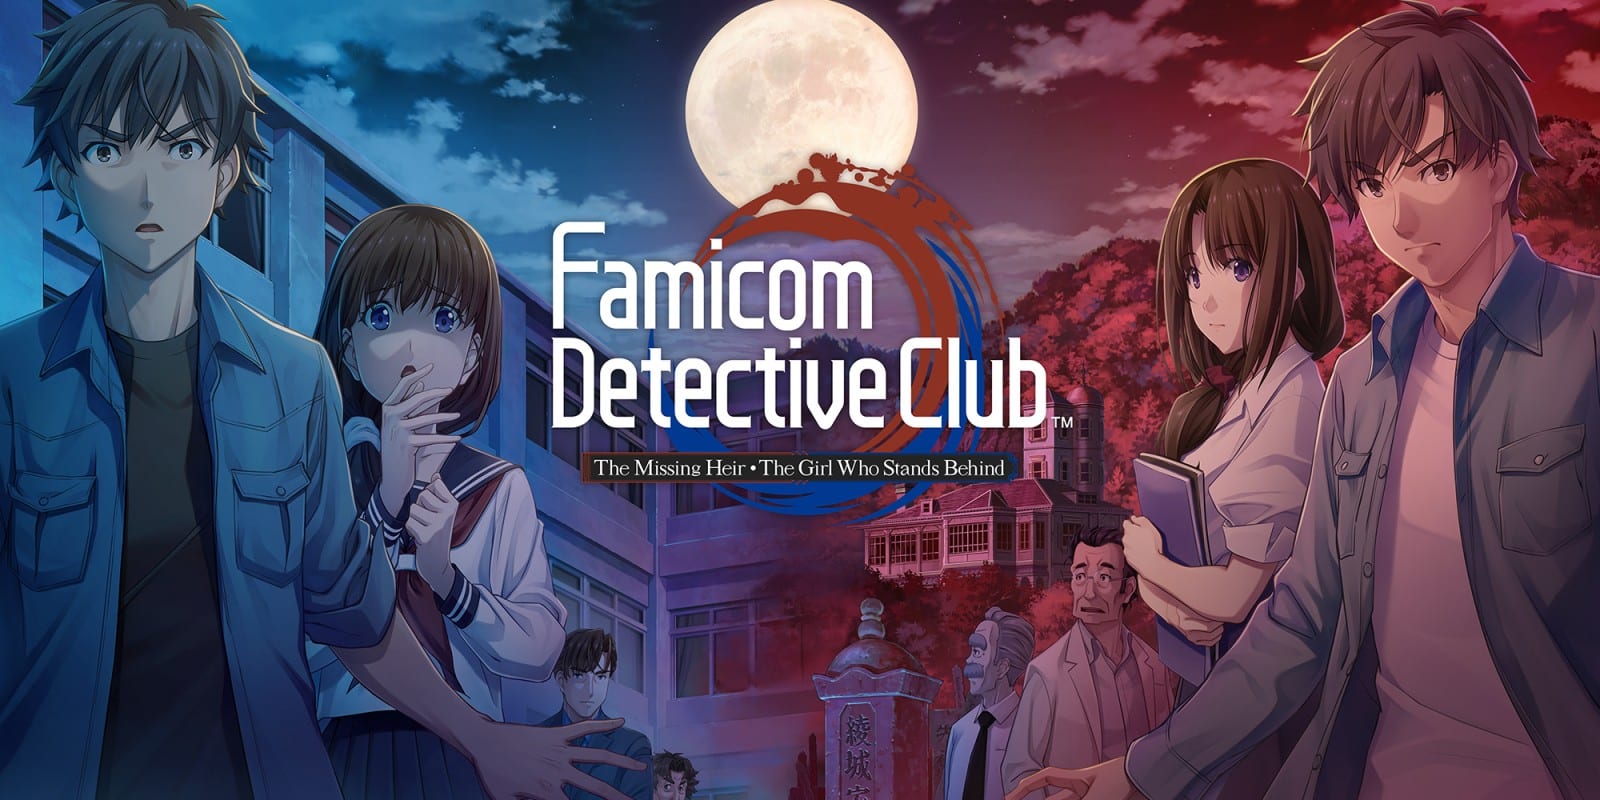 Famicom Detective Club Remastered Switch games release